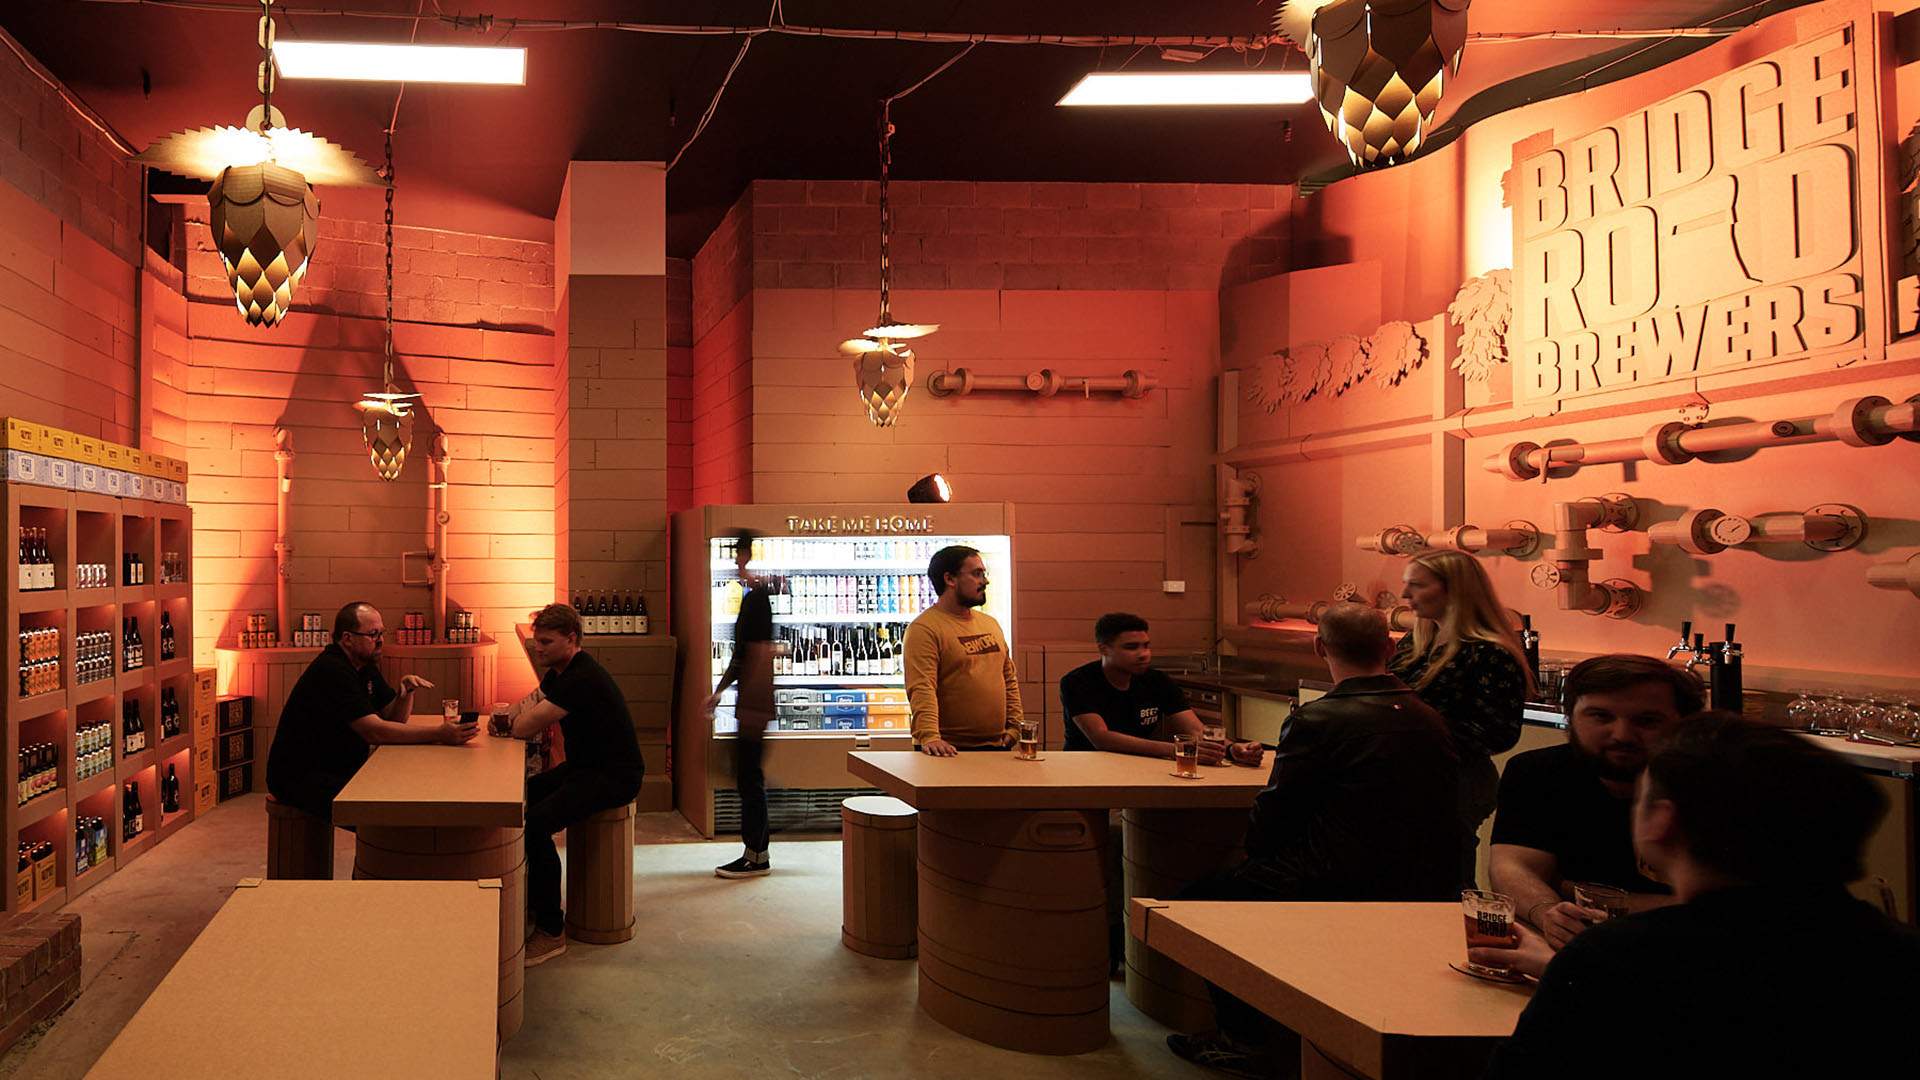 Victoria's Bridge Road Brewers Is Opening a Pop-Up Bar Made Entirely Out of Cardboard